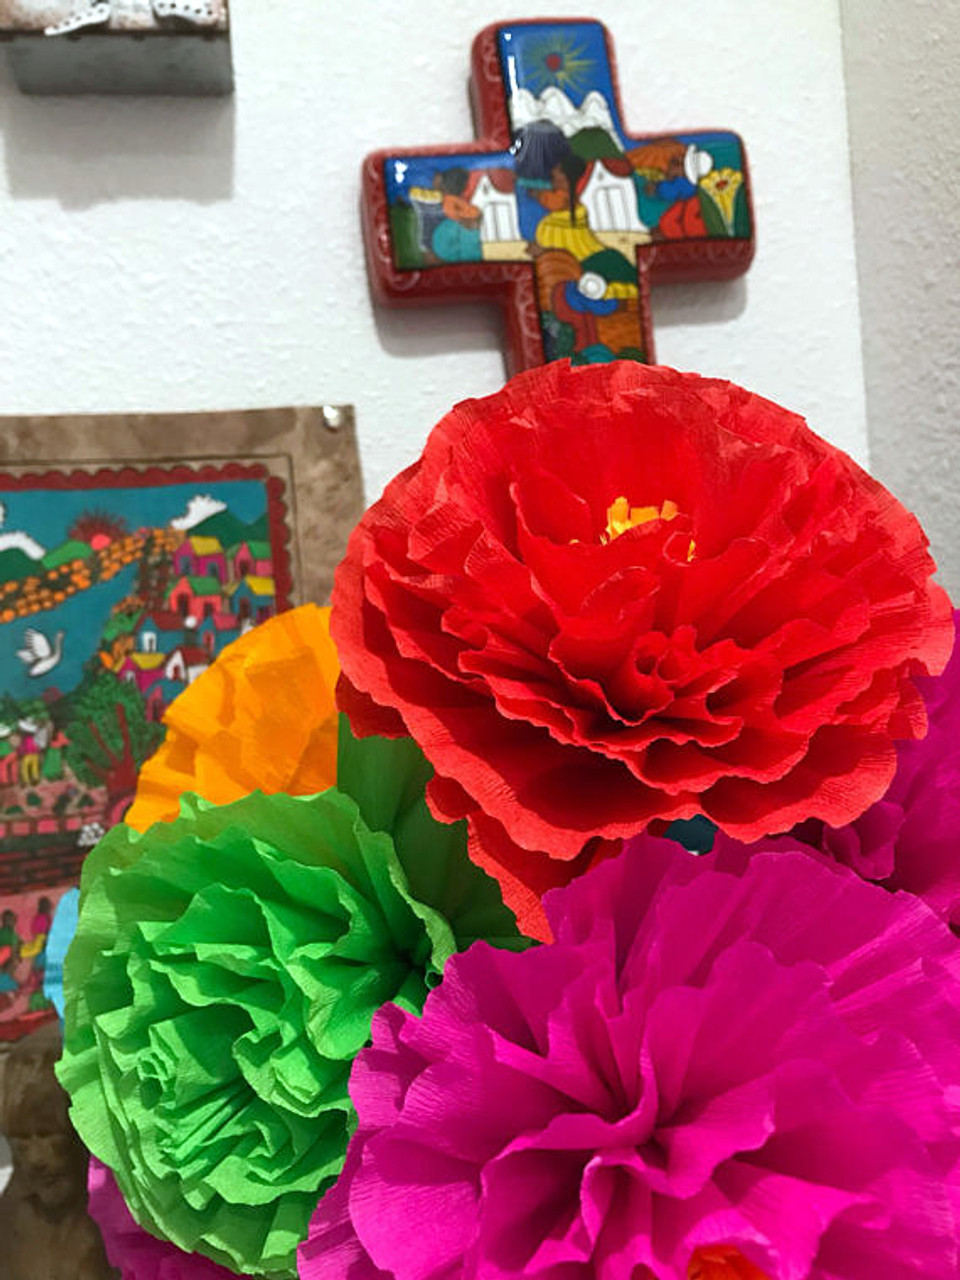 Mexican Crepe Paper Tissue Flowers - Set of 10 - My Mercado Mexican Imports